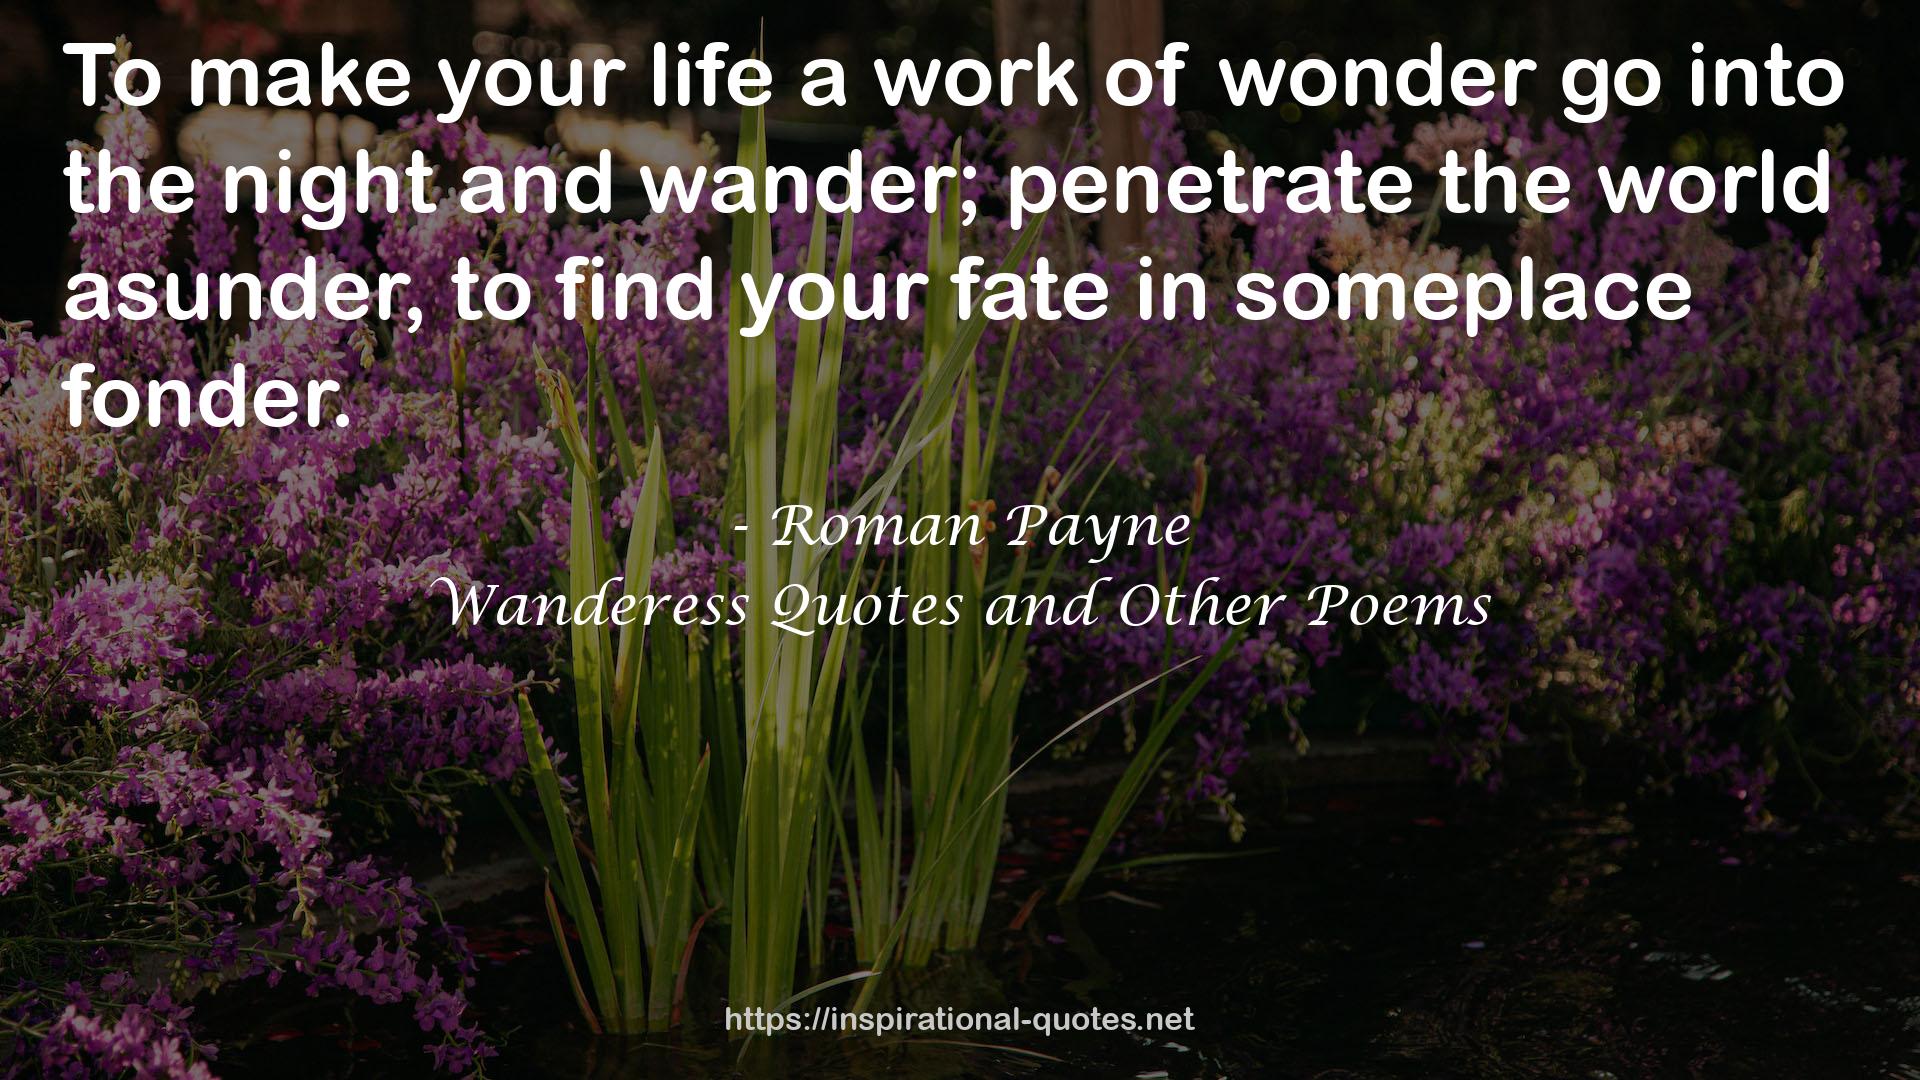 Wanderess Quotes and Other Poems QUOTES